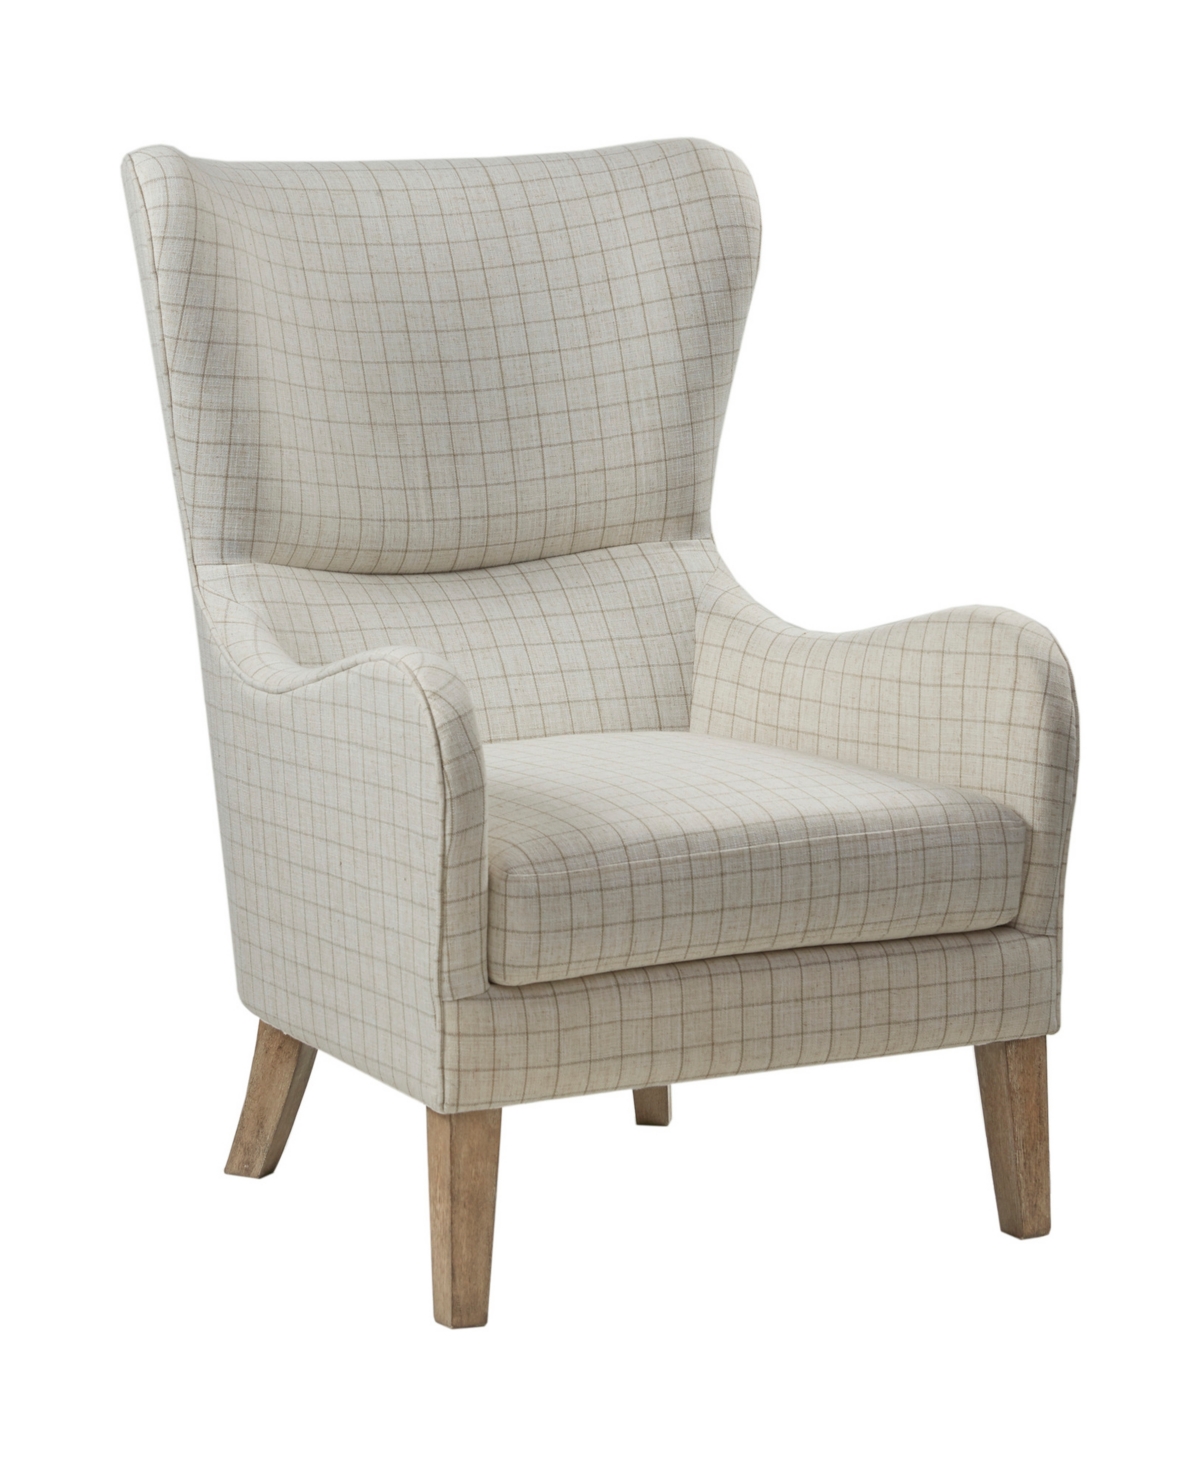 Madison Park Arianna Fabric Swoop Wing Chair In Linen